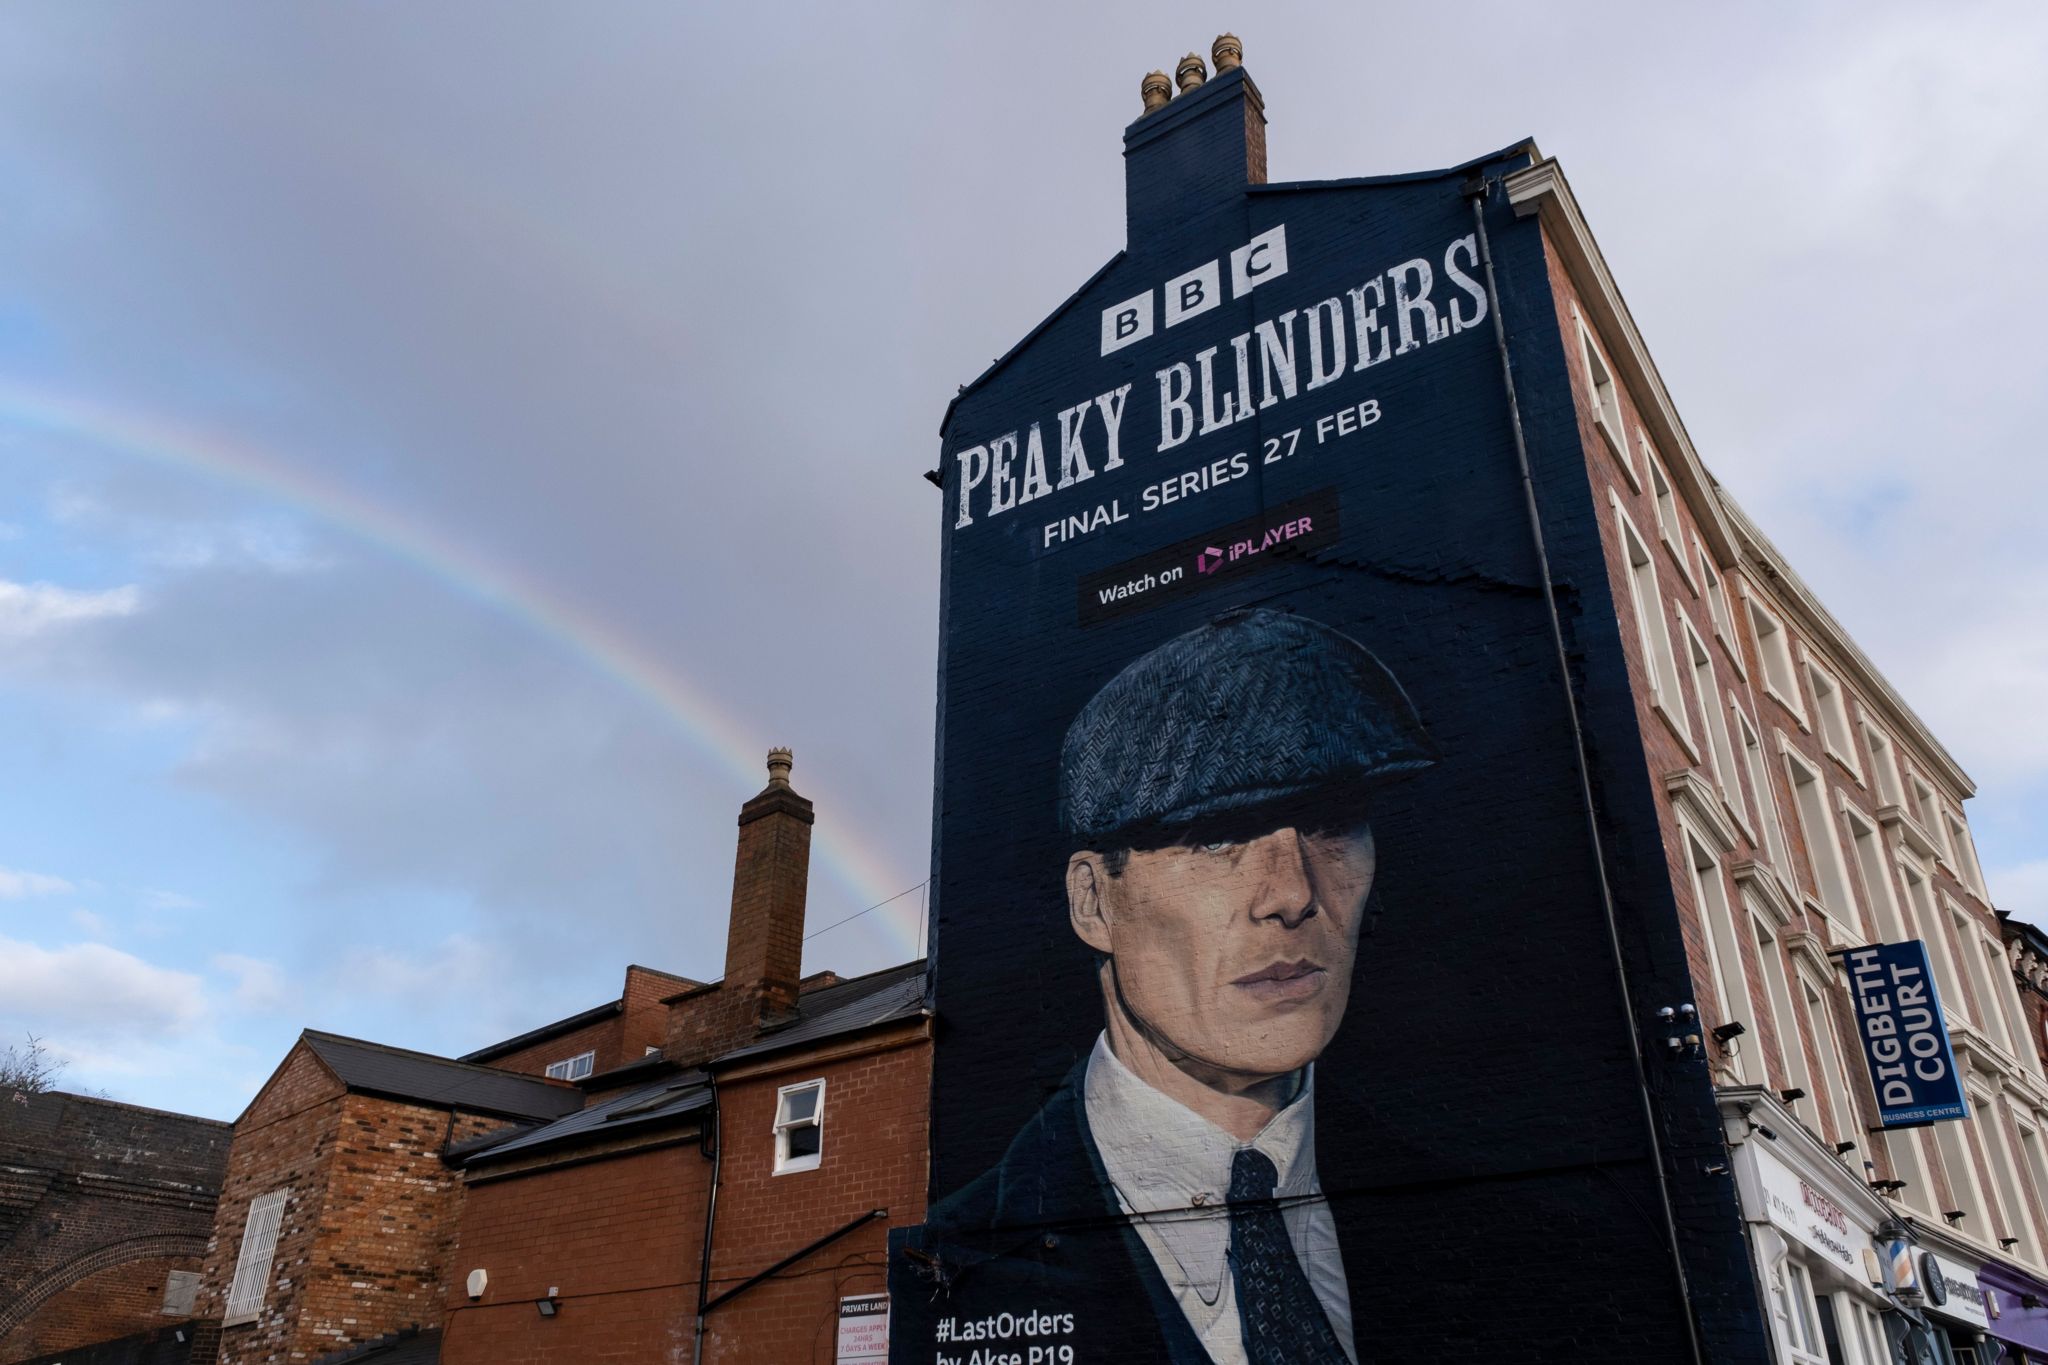 Peaky Blinders mural of the character Thomas Shelby played by actor Cillian Murphy